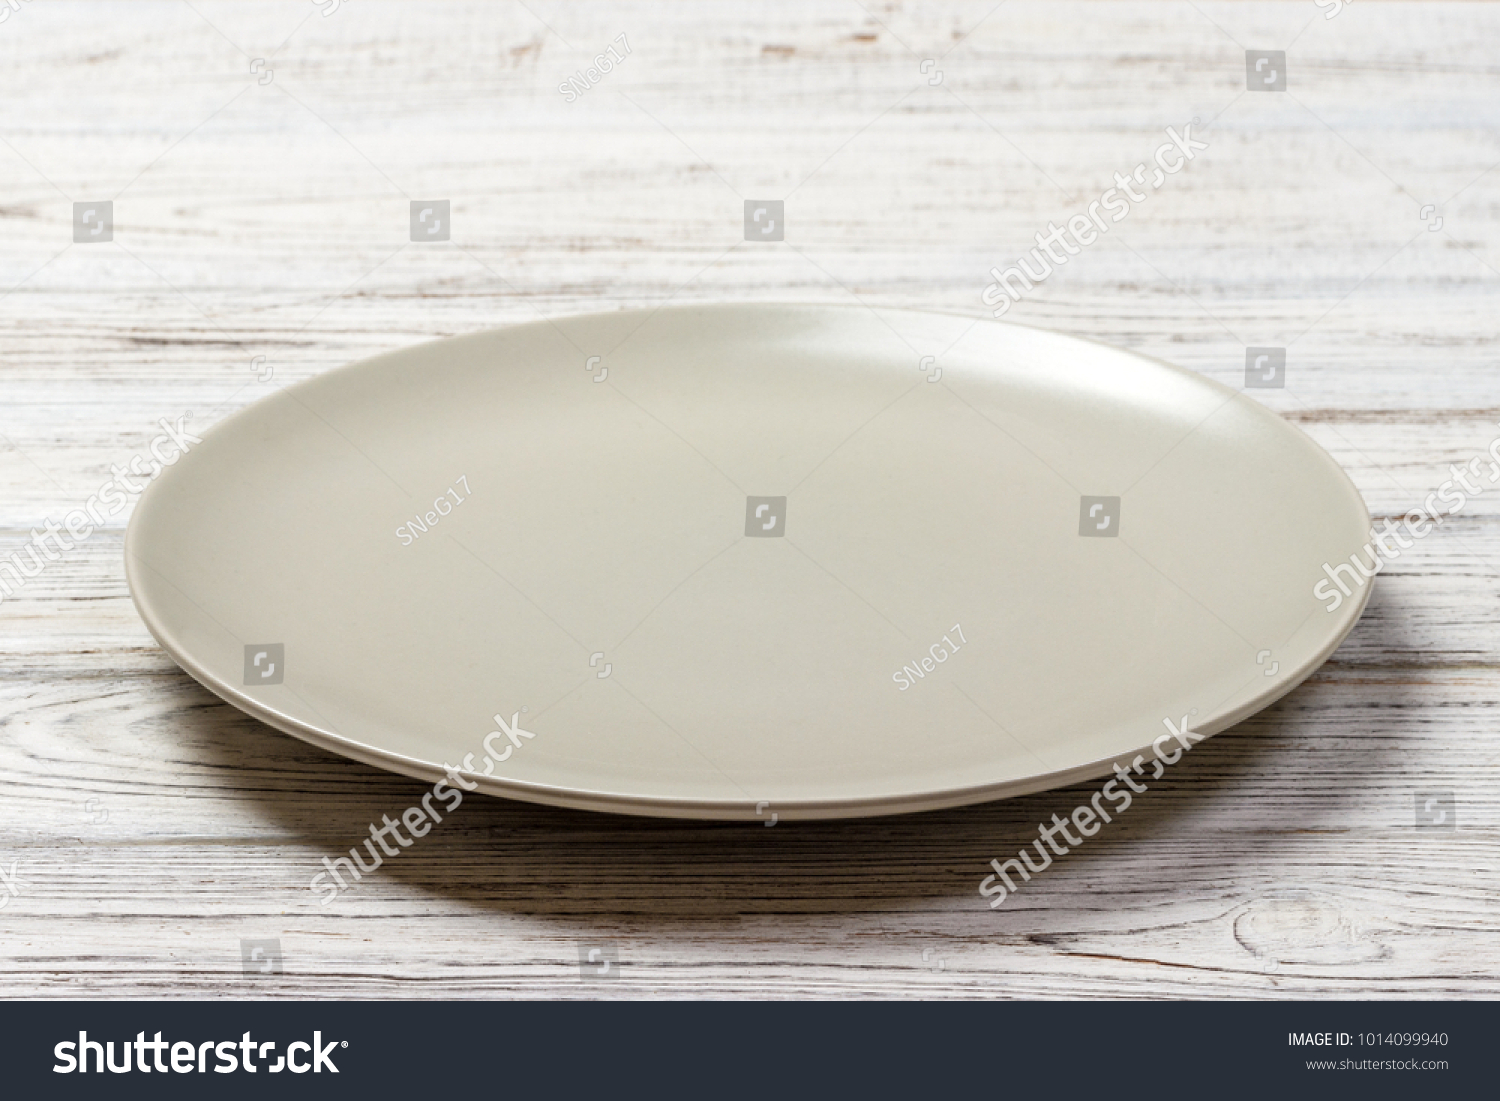 Perspective view. Empty white plate on wooden background. #1014099940